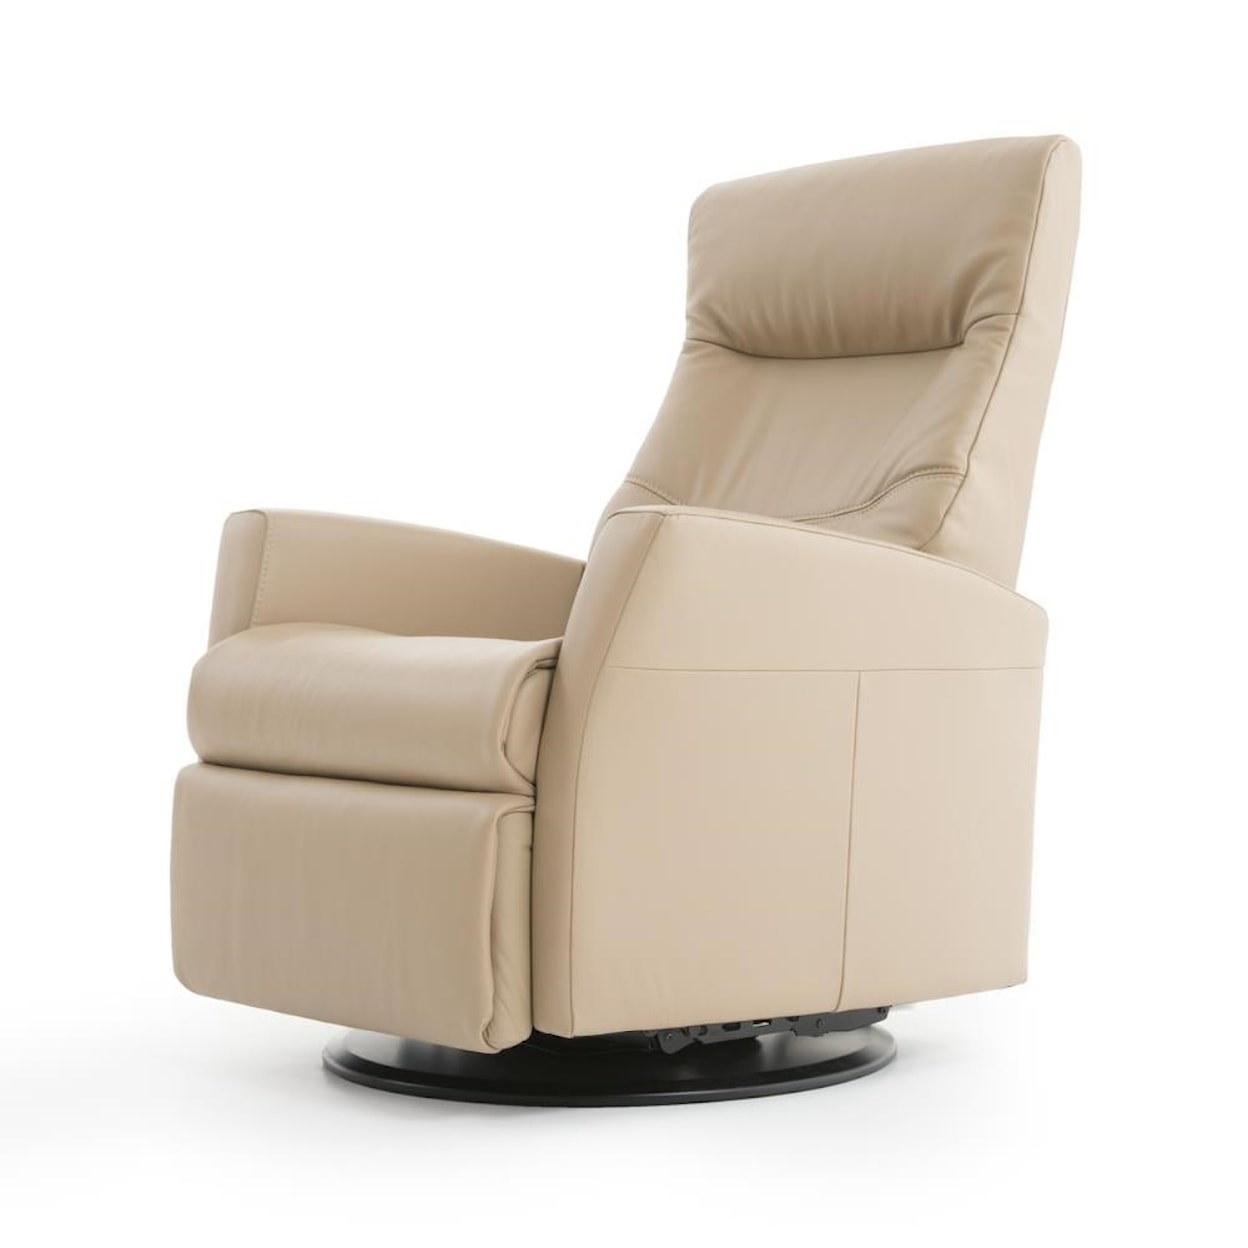 IMG Norway Lord Large Glider Recliner with Molded Foam